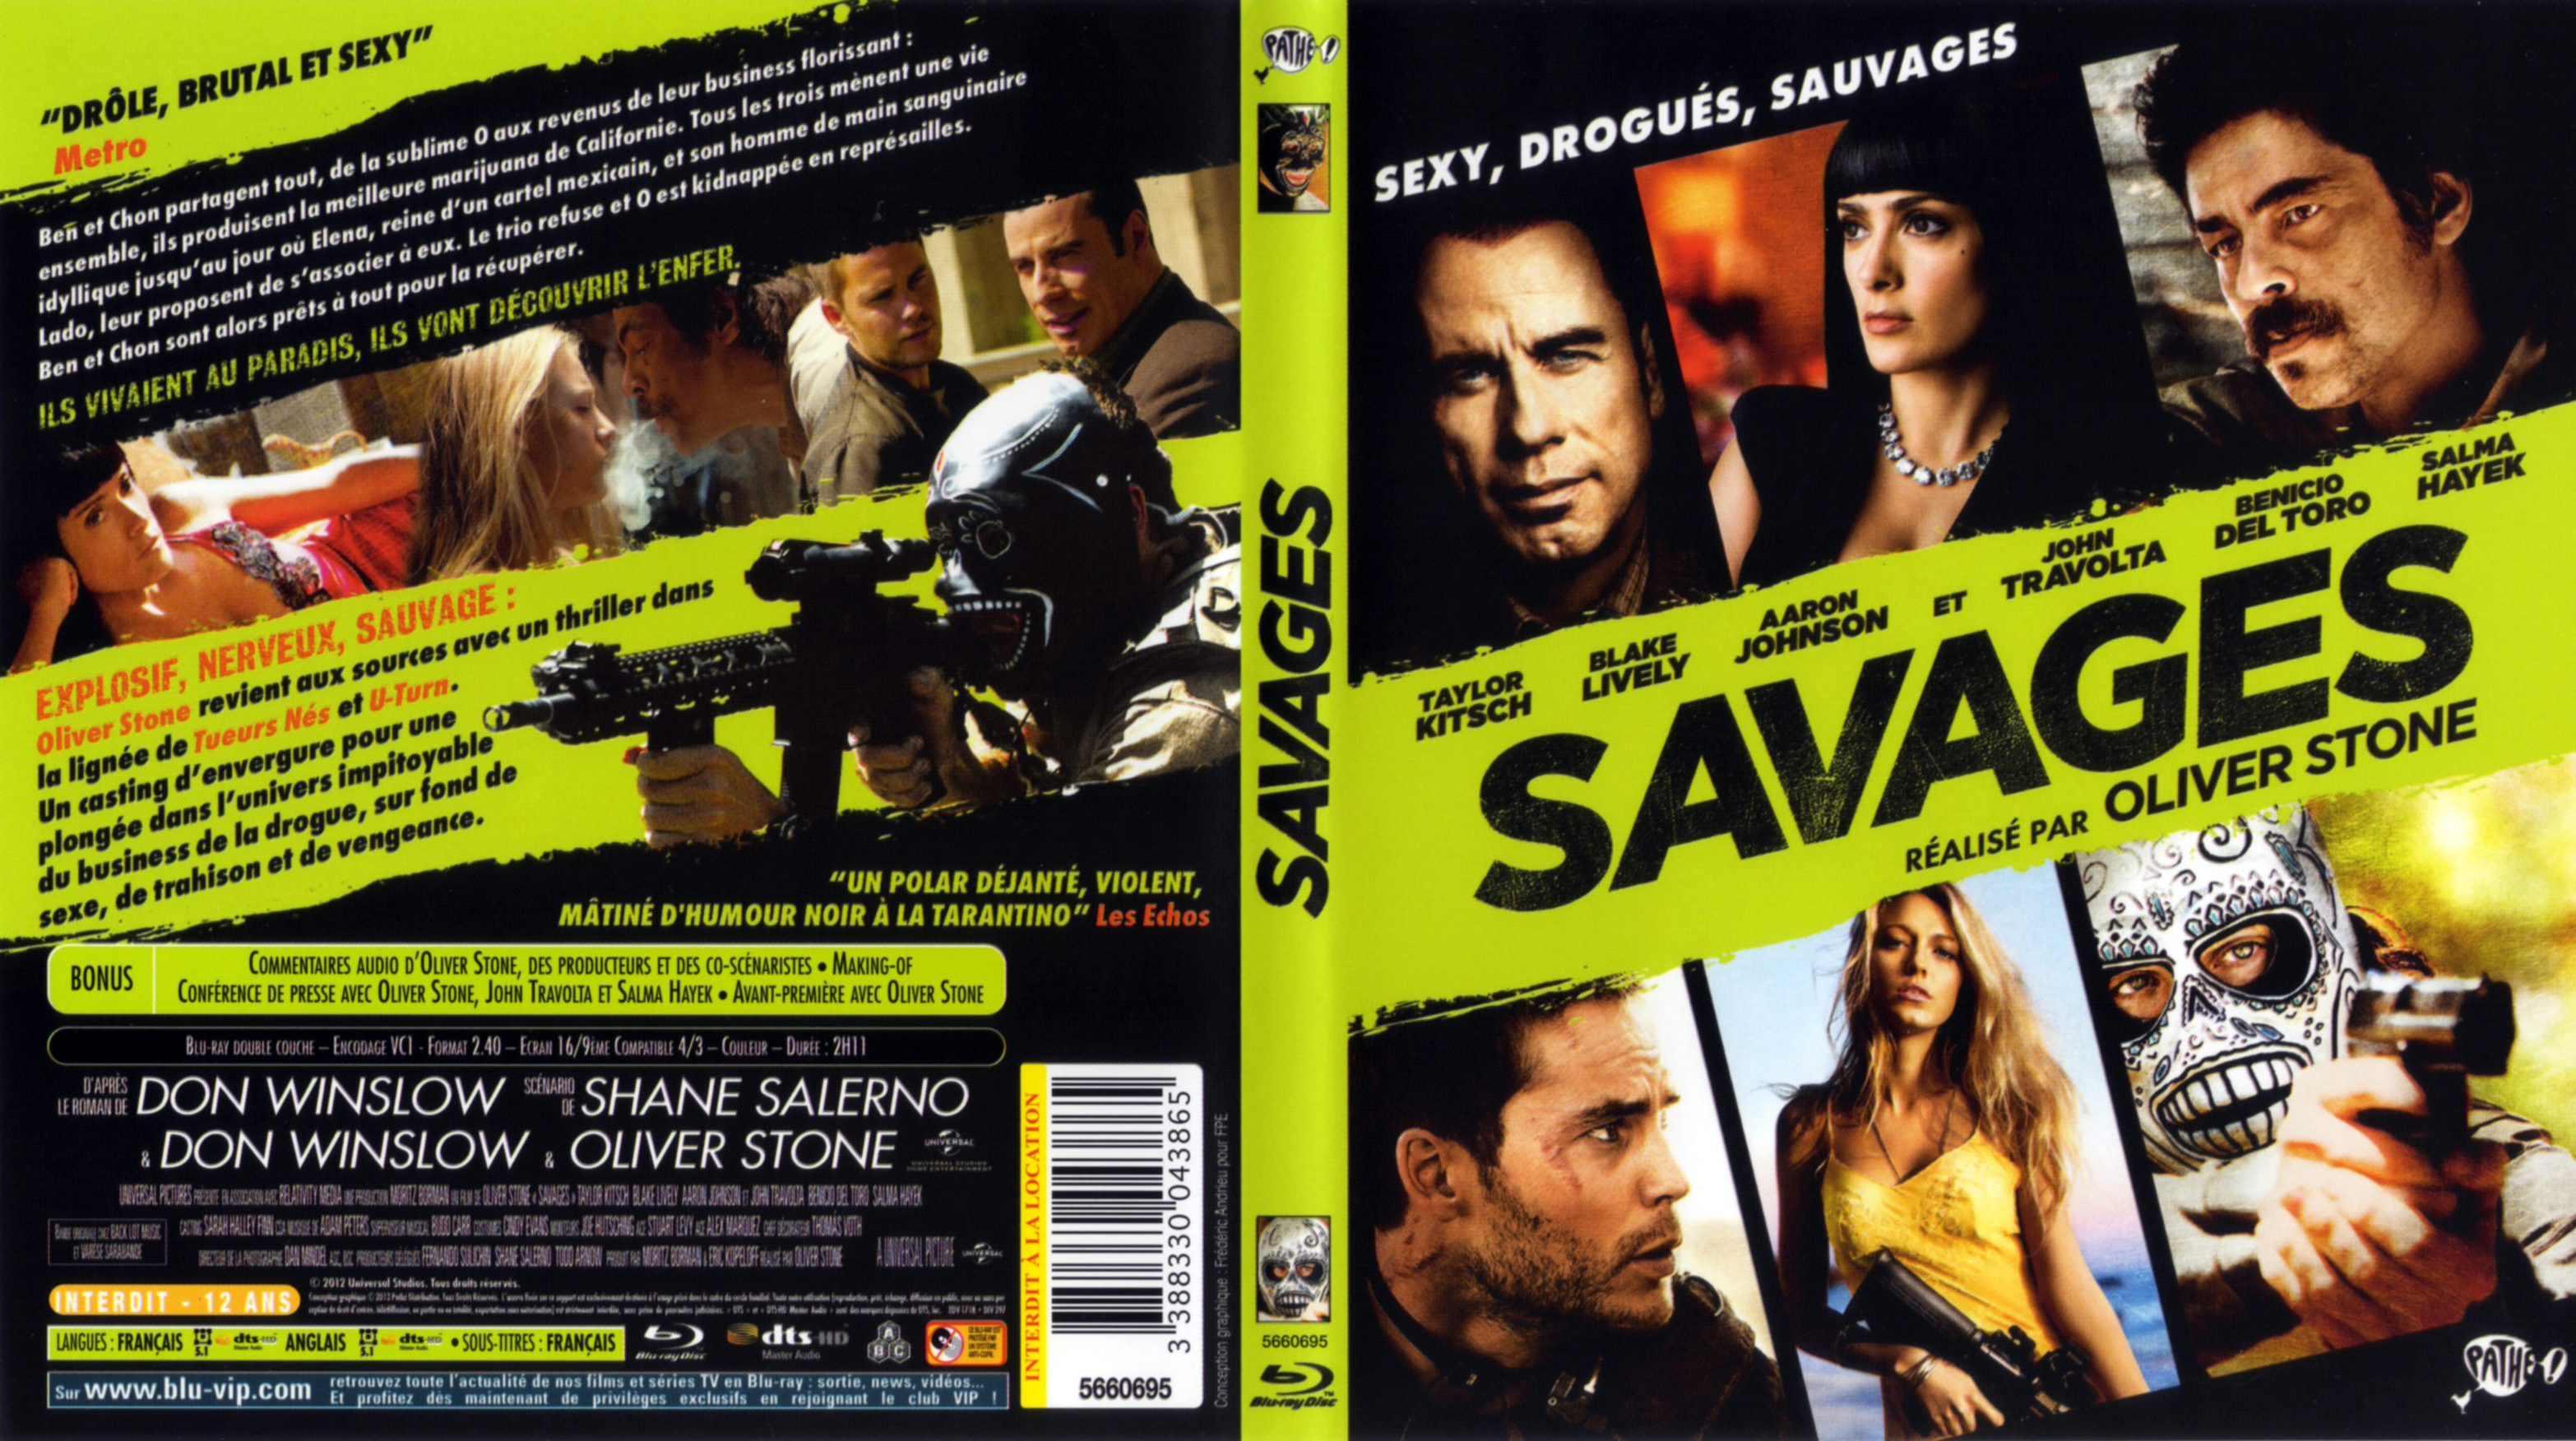 Jaquette DVD Savages (BLU-RAY)